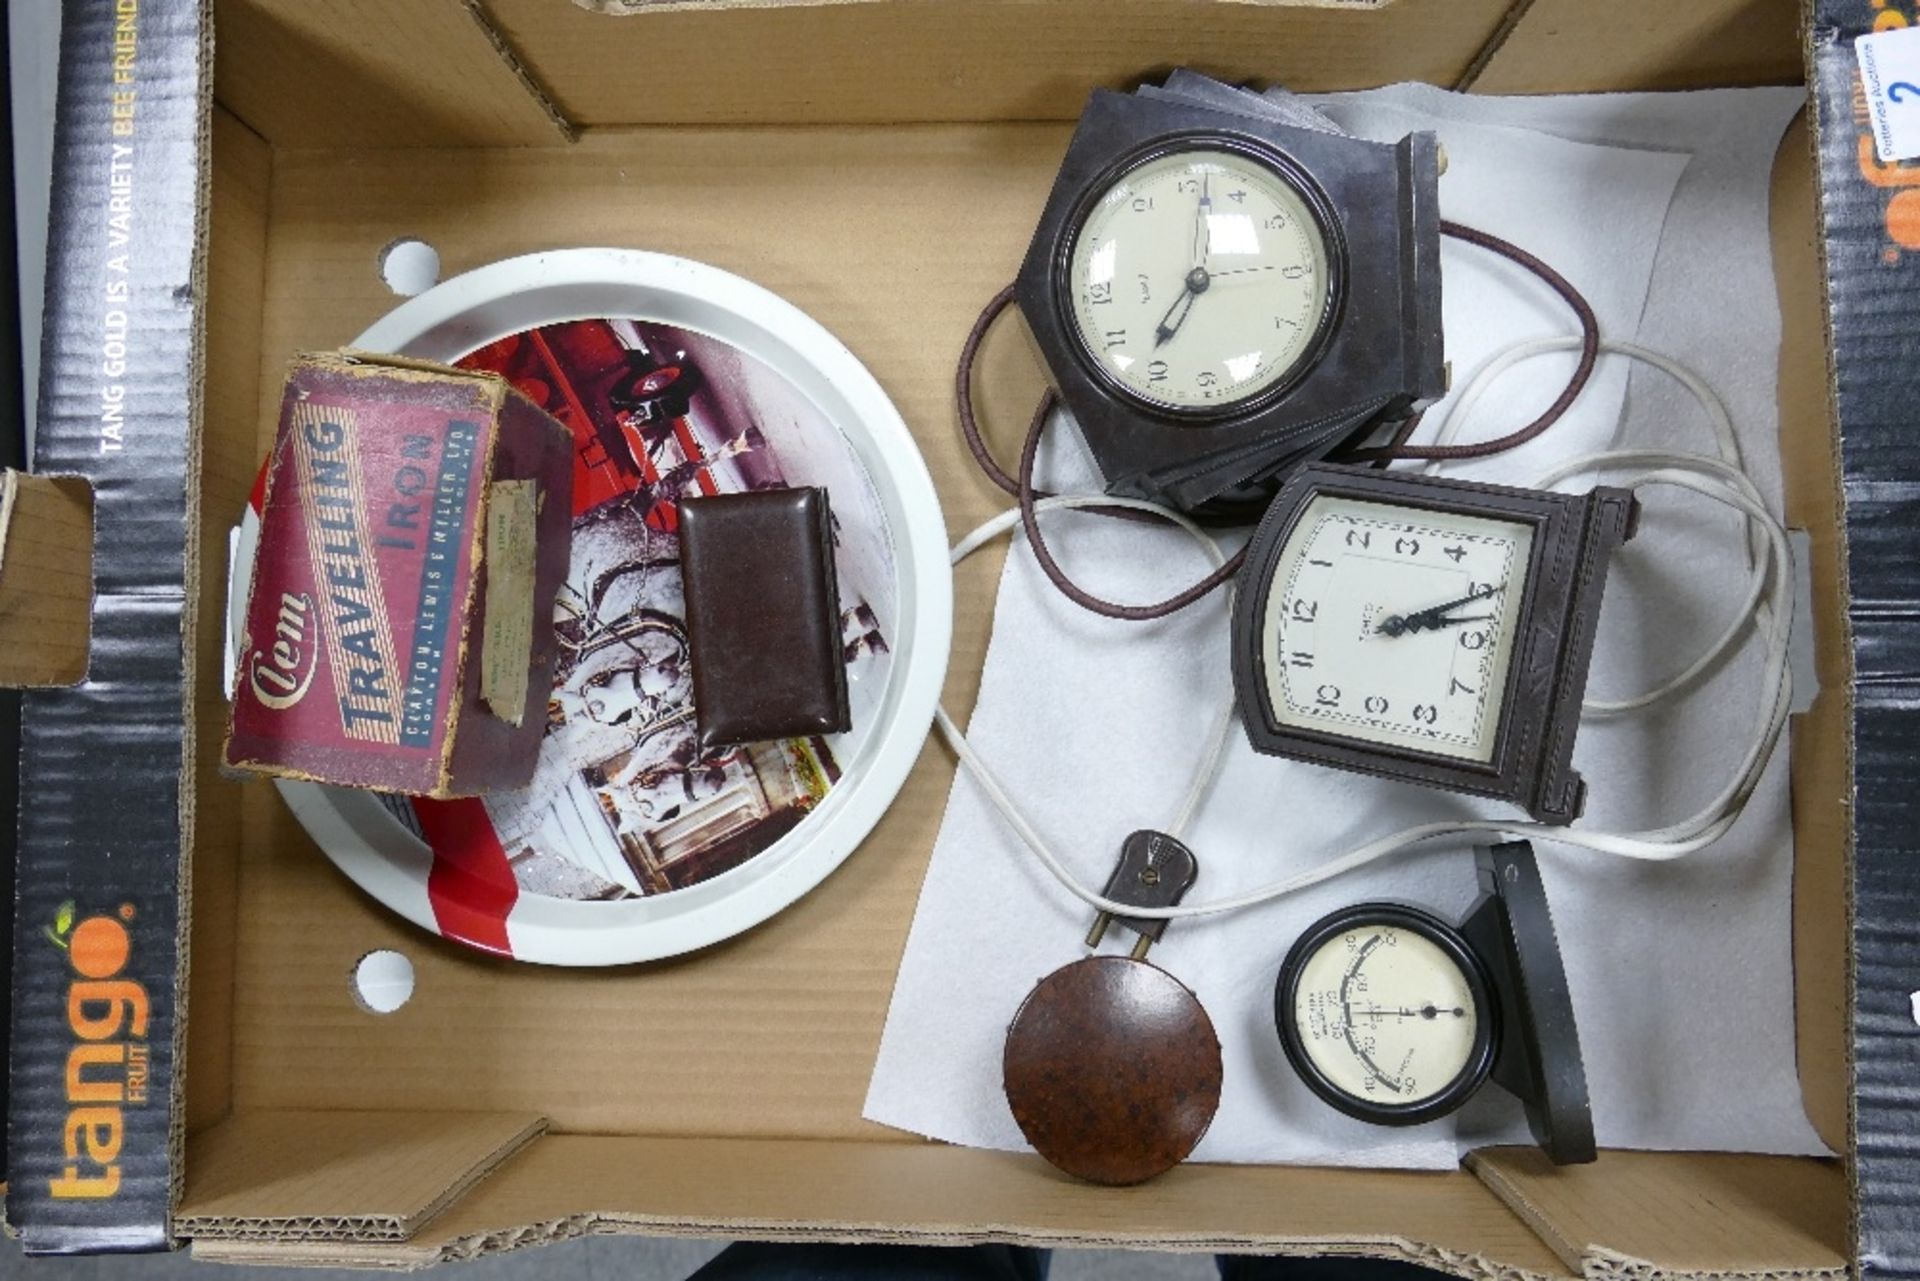 A collection of vintage Bakelite items including clocks, Thgermometer, Gilette Razor Box together